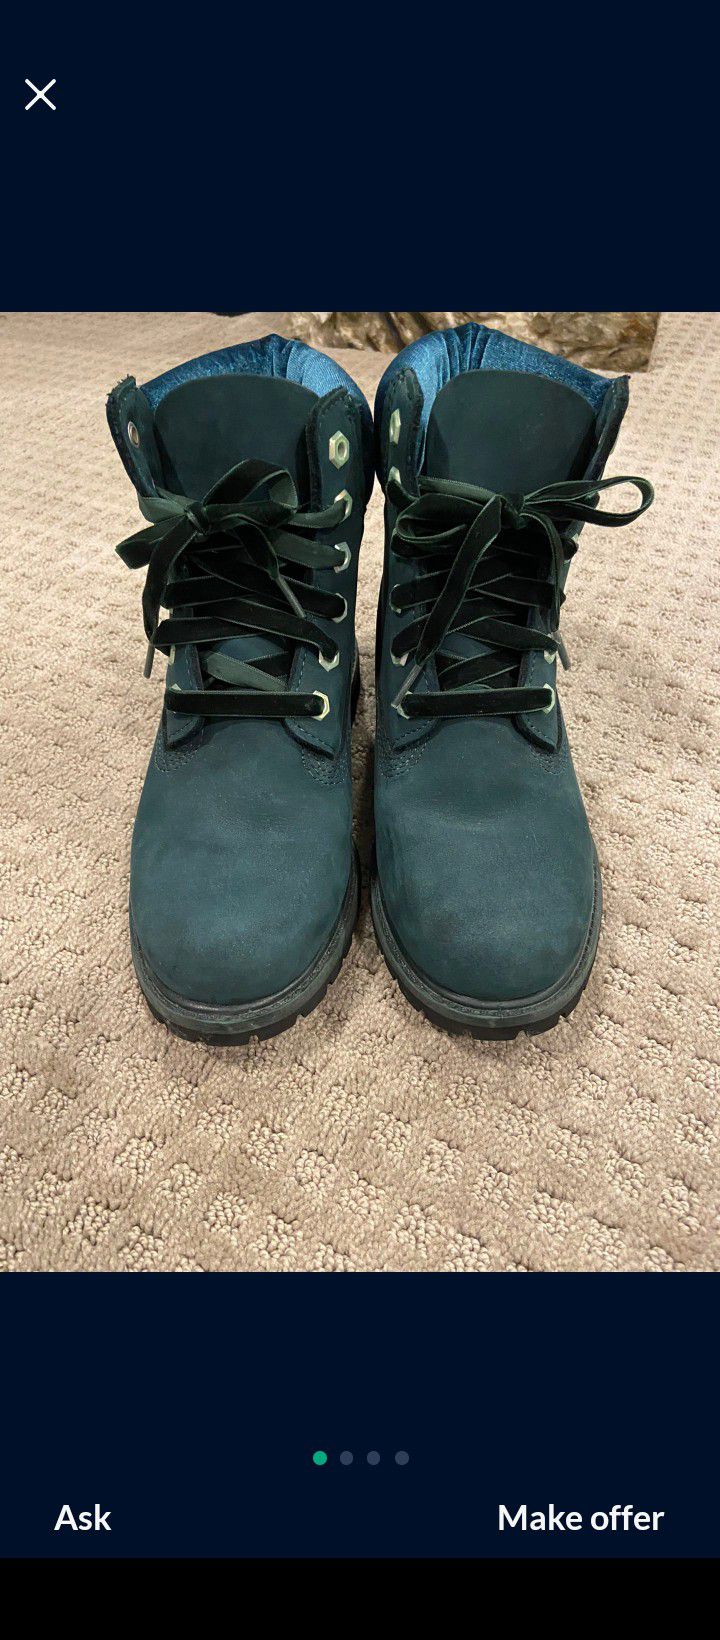 Limited green velvet timberland boot size 7